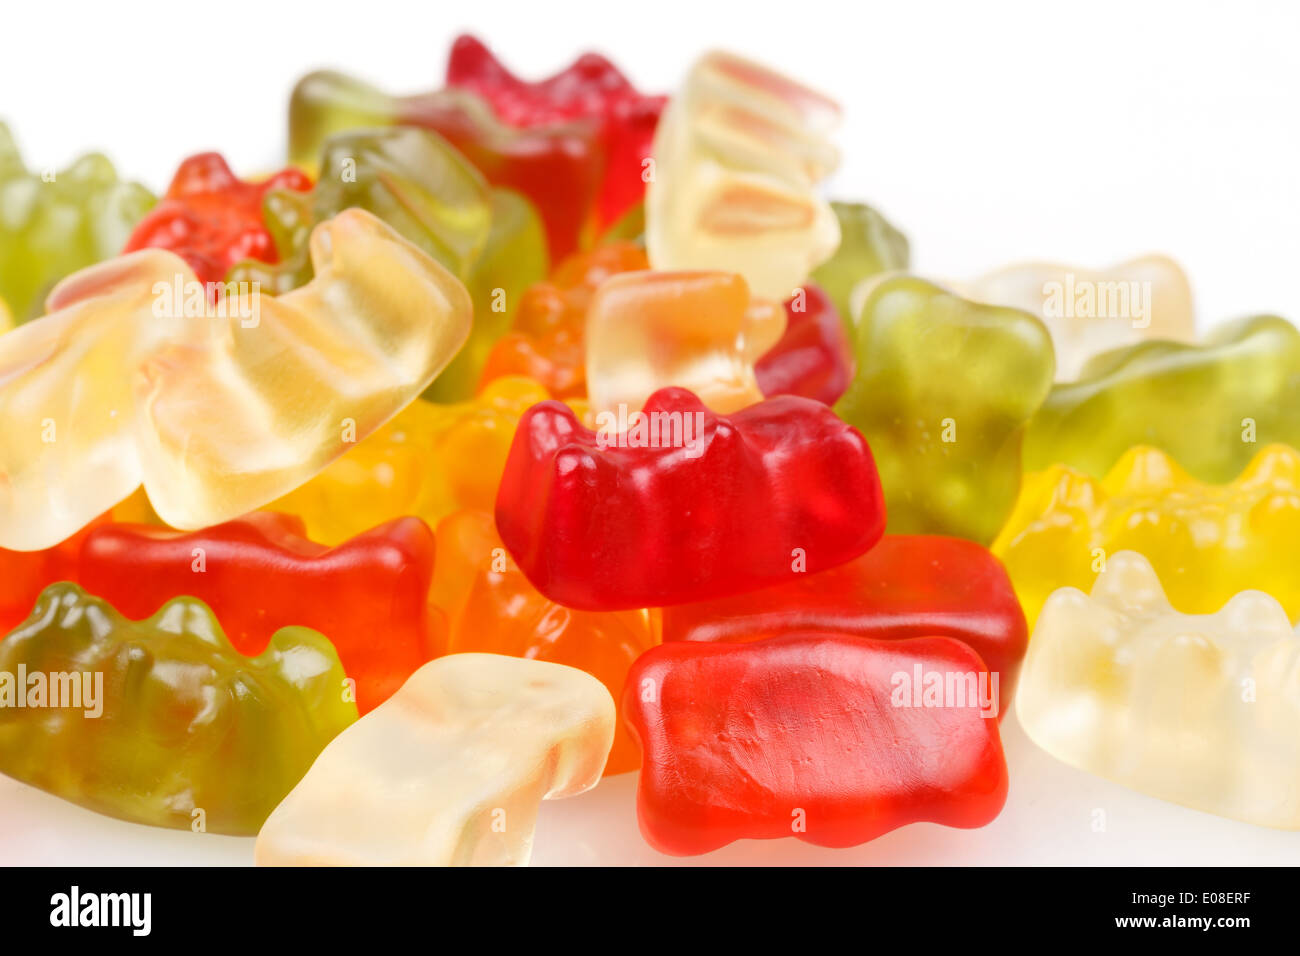 Gummy bears, Colorful jelly bear candies set isolated on white Stock Photo